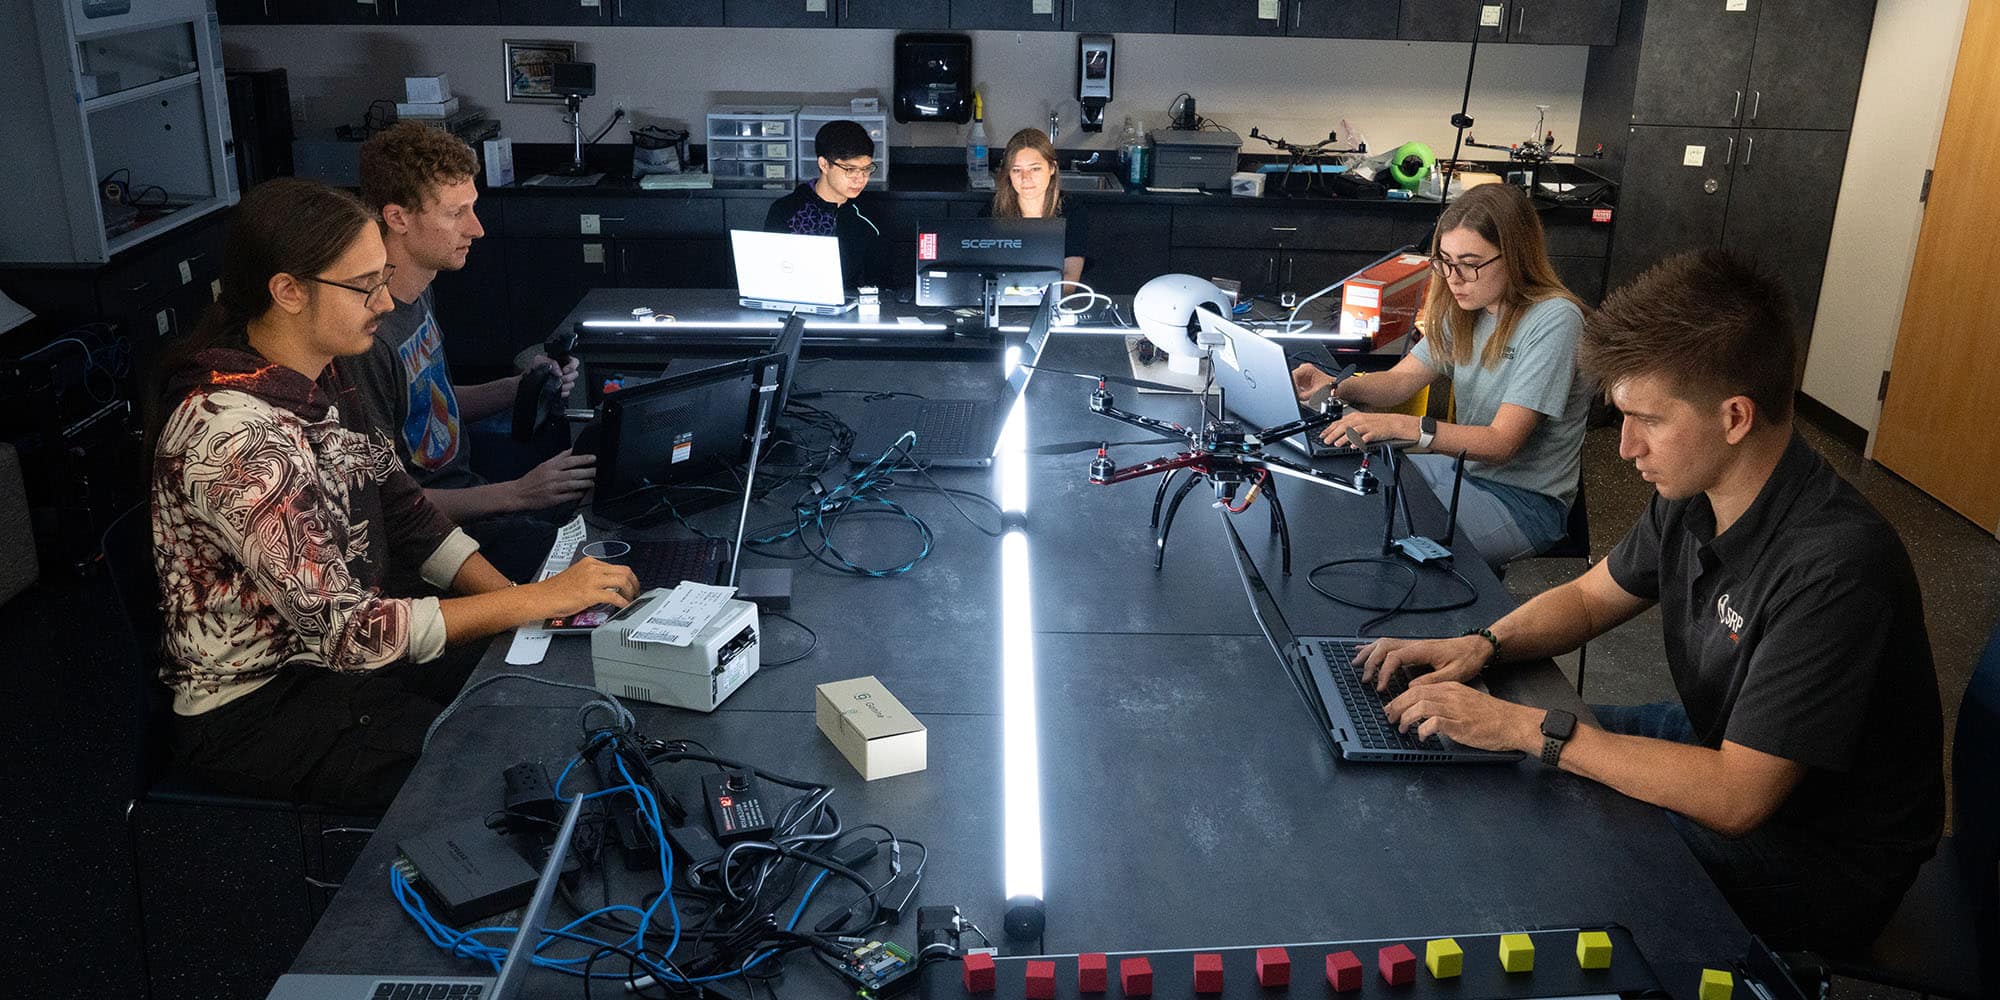 Seven students sit around a large black table, each working on a different laptop. Other equipment, a drone, and several small yellow and red cubes are also on the table.